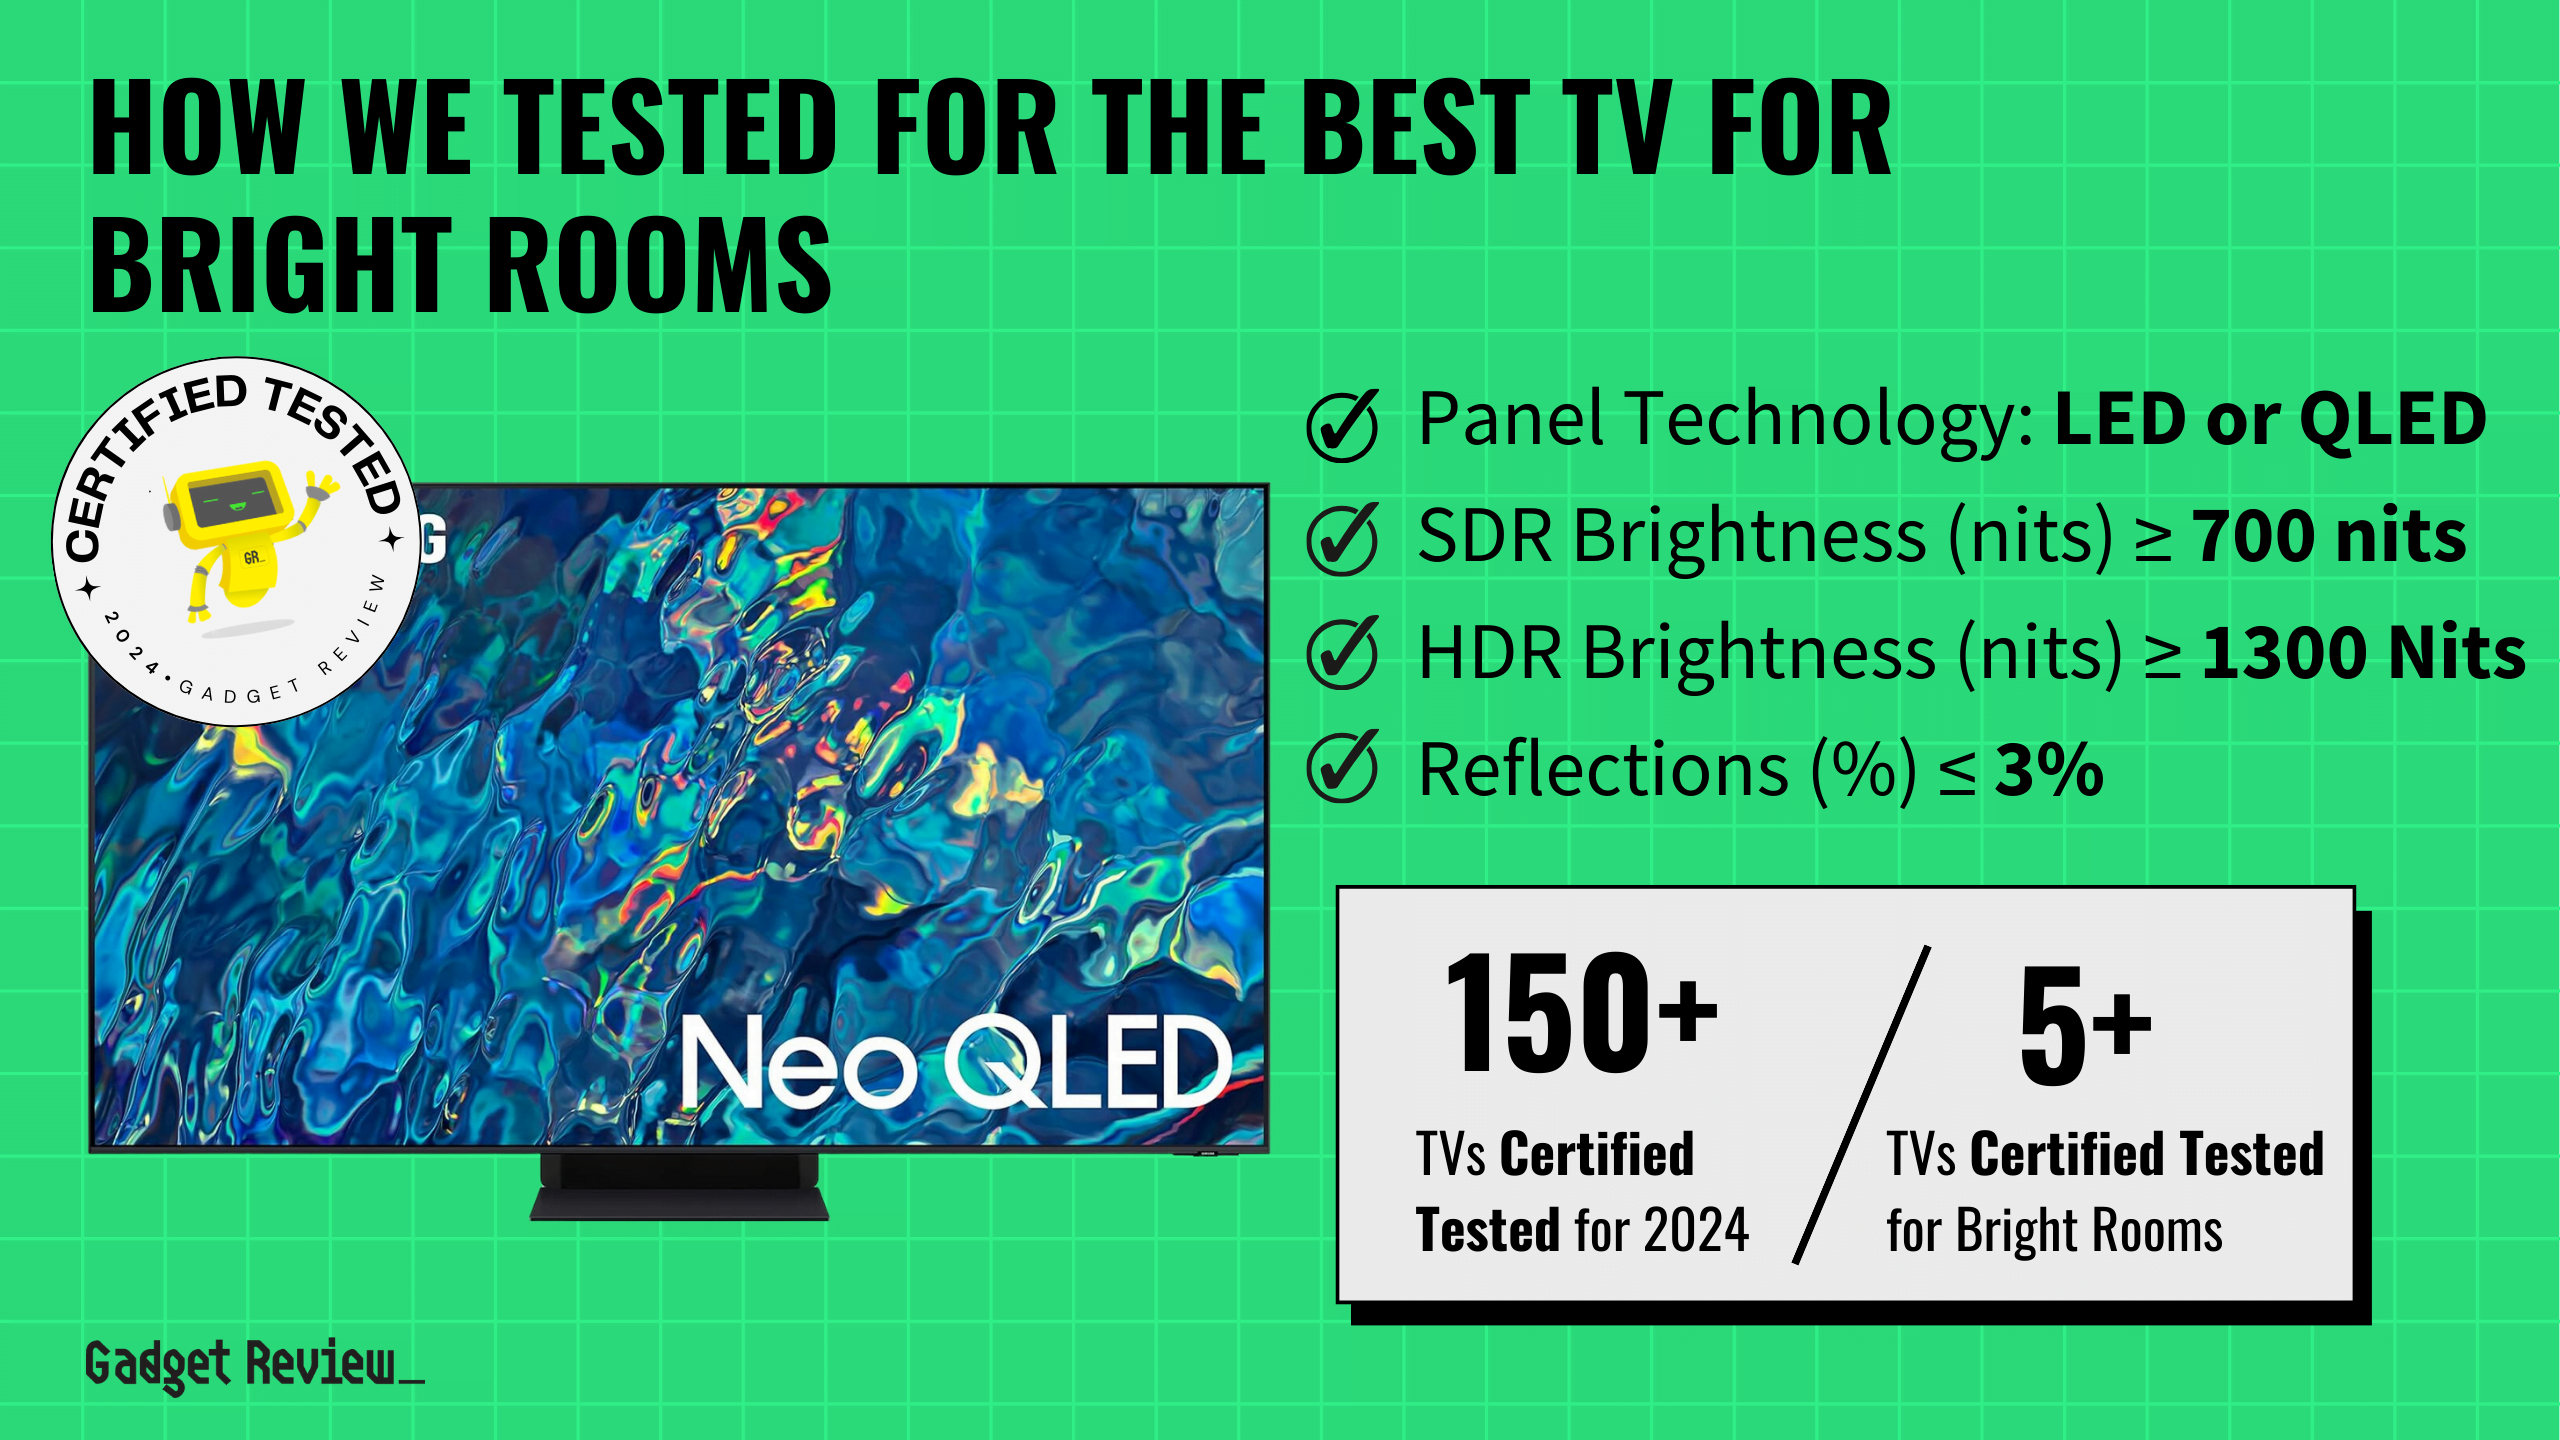 What Are The Top 6 TVs for Bright Rooms?